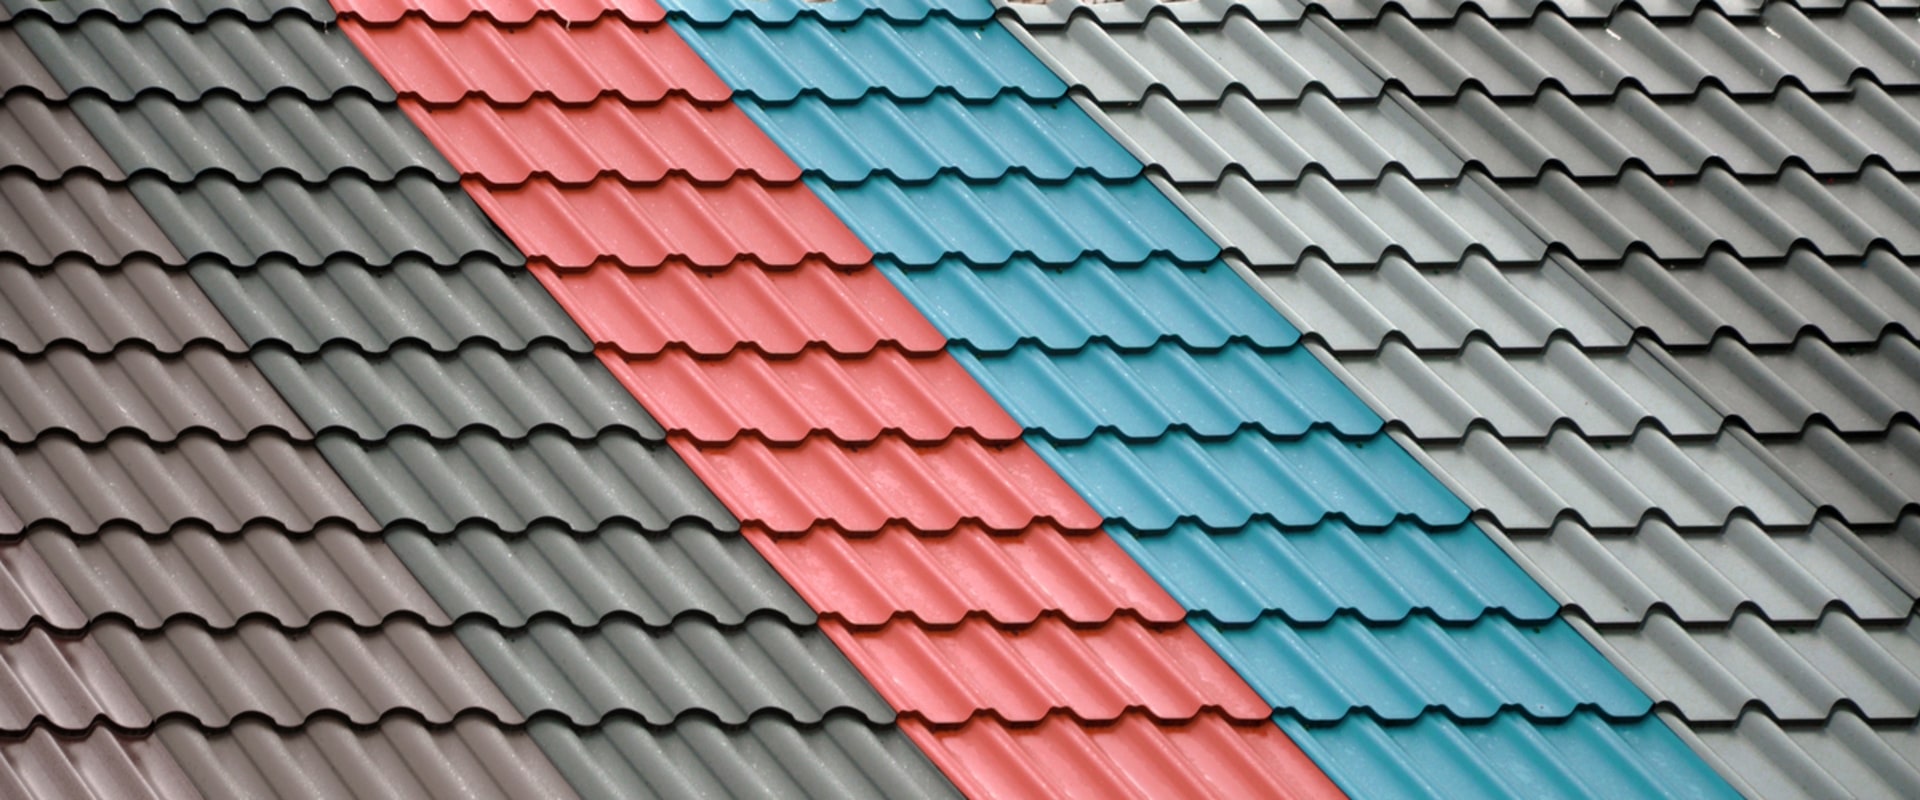 Which roof covering is most likely to last the longest?